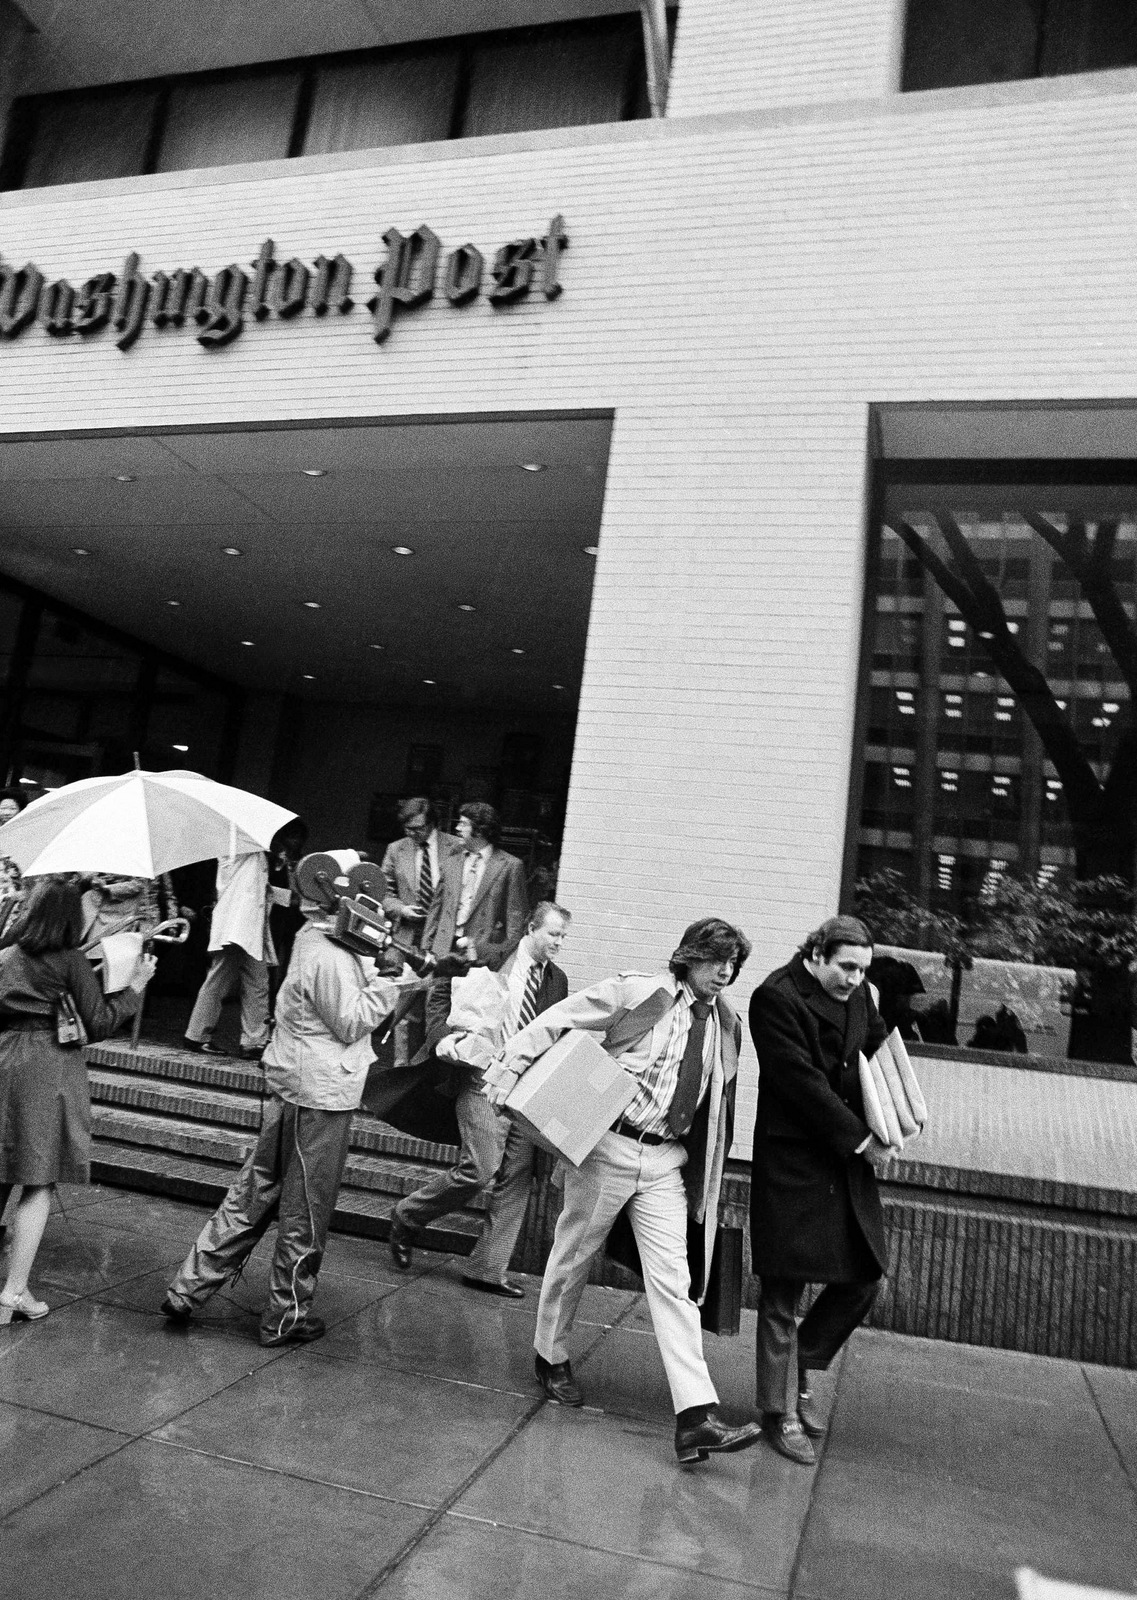 Washington Post reporters Carl Bernstein, left, and Bob Woodward, who uncovered the Watergate scandal, along with other editorial employees, walk off the job at the Post in Washington, April 8, 1974, after Baltimore-Washington arm of the American Newspaper Guild struck the paper. (AP Photo)